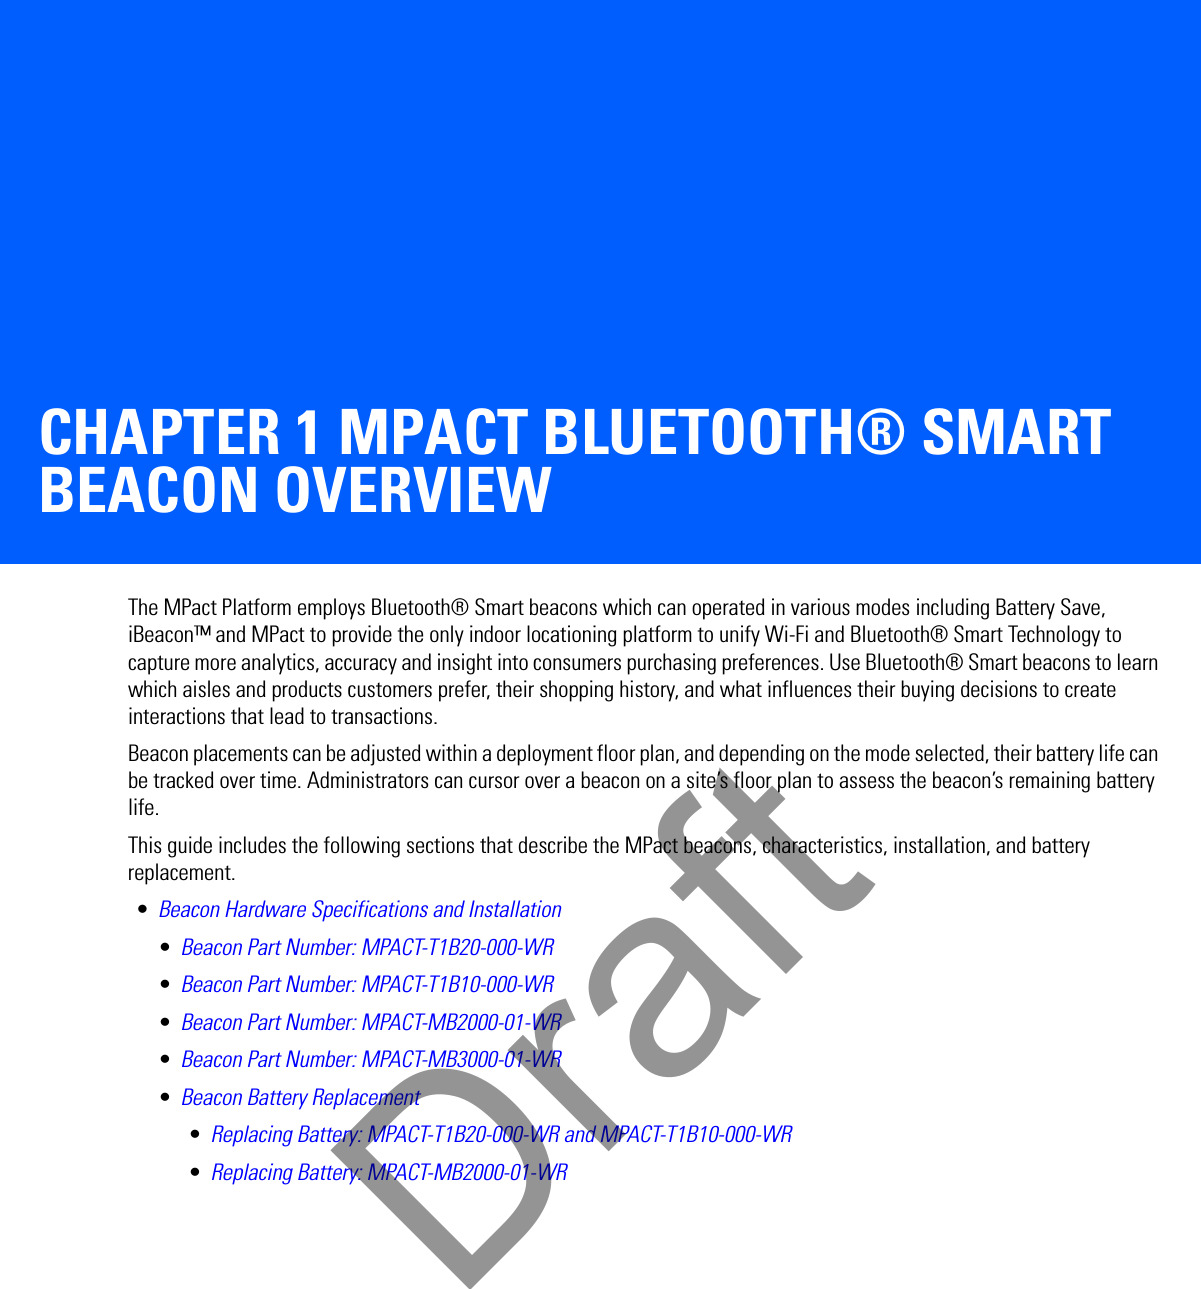 CHAPTER 1 MPACT BLUETOOTH® SMART BEACON OVERVIEWThe MPact Platform employs Bluetooth® Smart beacons which can operated in various modes including Battery Save, iBeacon™ and MPact to provide the only indoor locationing platform to unify Wi-Fi and Bluetooth® Smart Technology to capture more analytics, accuracy and insight into consumers purchasing preferences. Use Bluetooth® Smart beacons to learn which aisles and products customers prefer, their shopping history, and what influences their buying decisions to create interactions that lead to transactions.Beacon placements can be adjusted within a deployment floor plan, and depending on the mode selected, their battery life can be tracked over time. Administrators can cursor over a beacon on a site’s floor plan to assess the beacon’s remaining battery life.This guide includes the following sections that describe the MPact beacons, characteristics, installation, and battery replacement. •Beacon Hardware Specifications and Installation•Beacon Part Number: MPACT-T1B20-000-WR•Beacon Part Number: MPACT-T1B10-000-WR•Beacon Part Number: MPACT-MB2000-01-WR•Beacon Part Number: MPACT-MB3000-01-WR•Beacon Battery Replacement•Replacing Battery: MPACT-T1B20-000-WR and MPACT-T1B10-000-WR•Replacing Battery: MPACT-MB2000-01-WRDraft